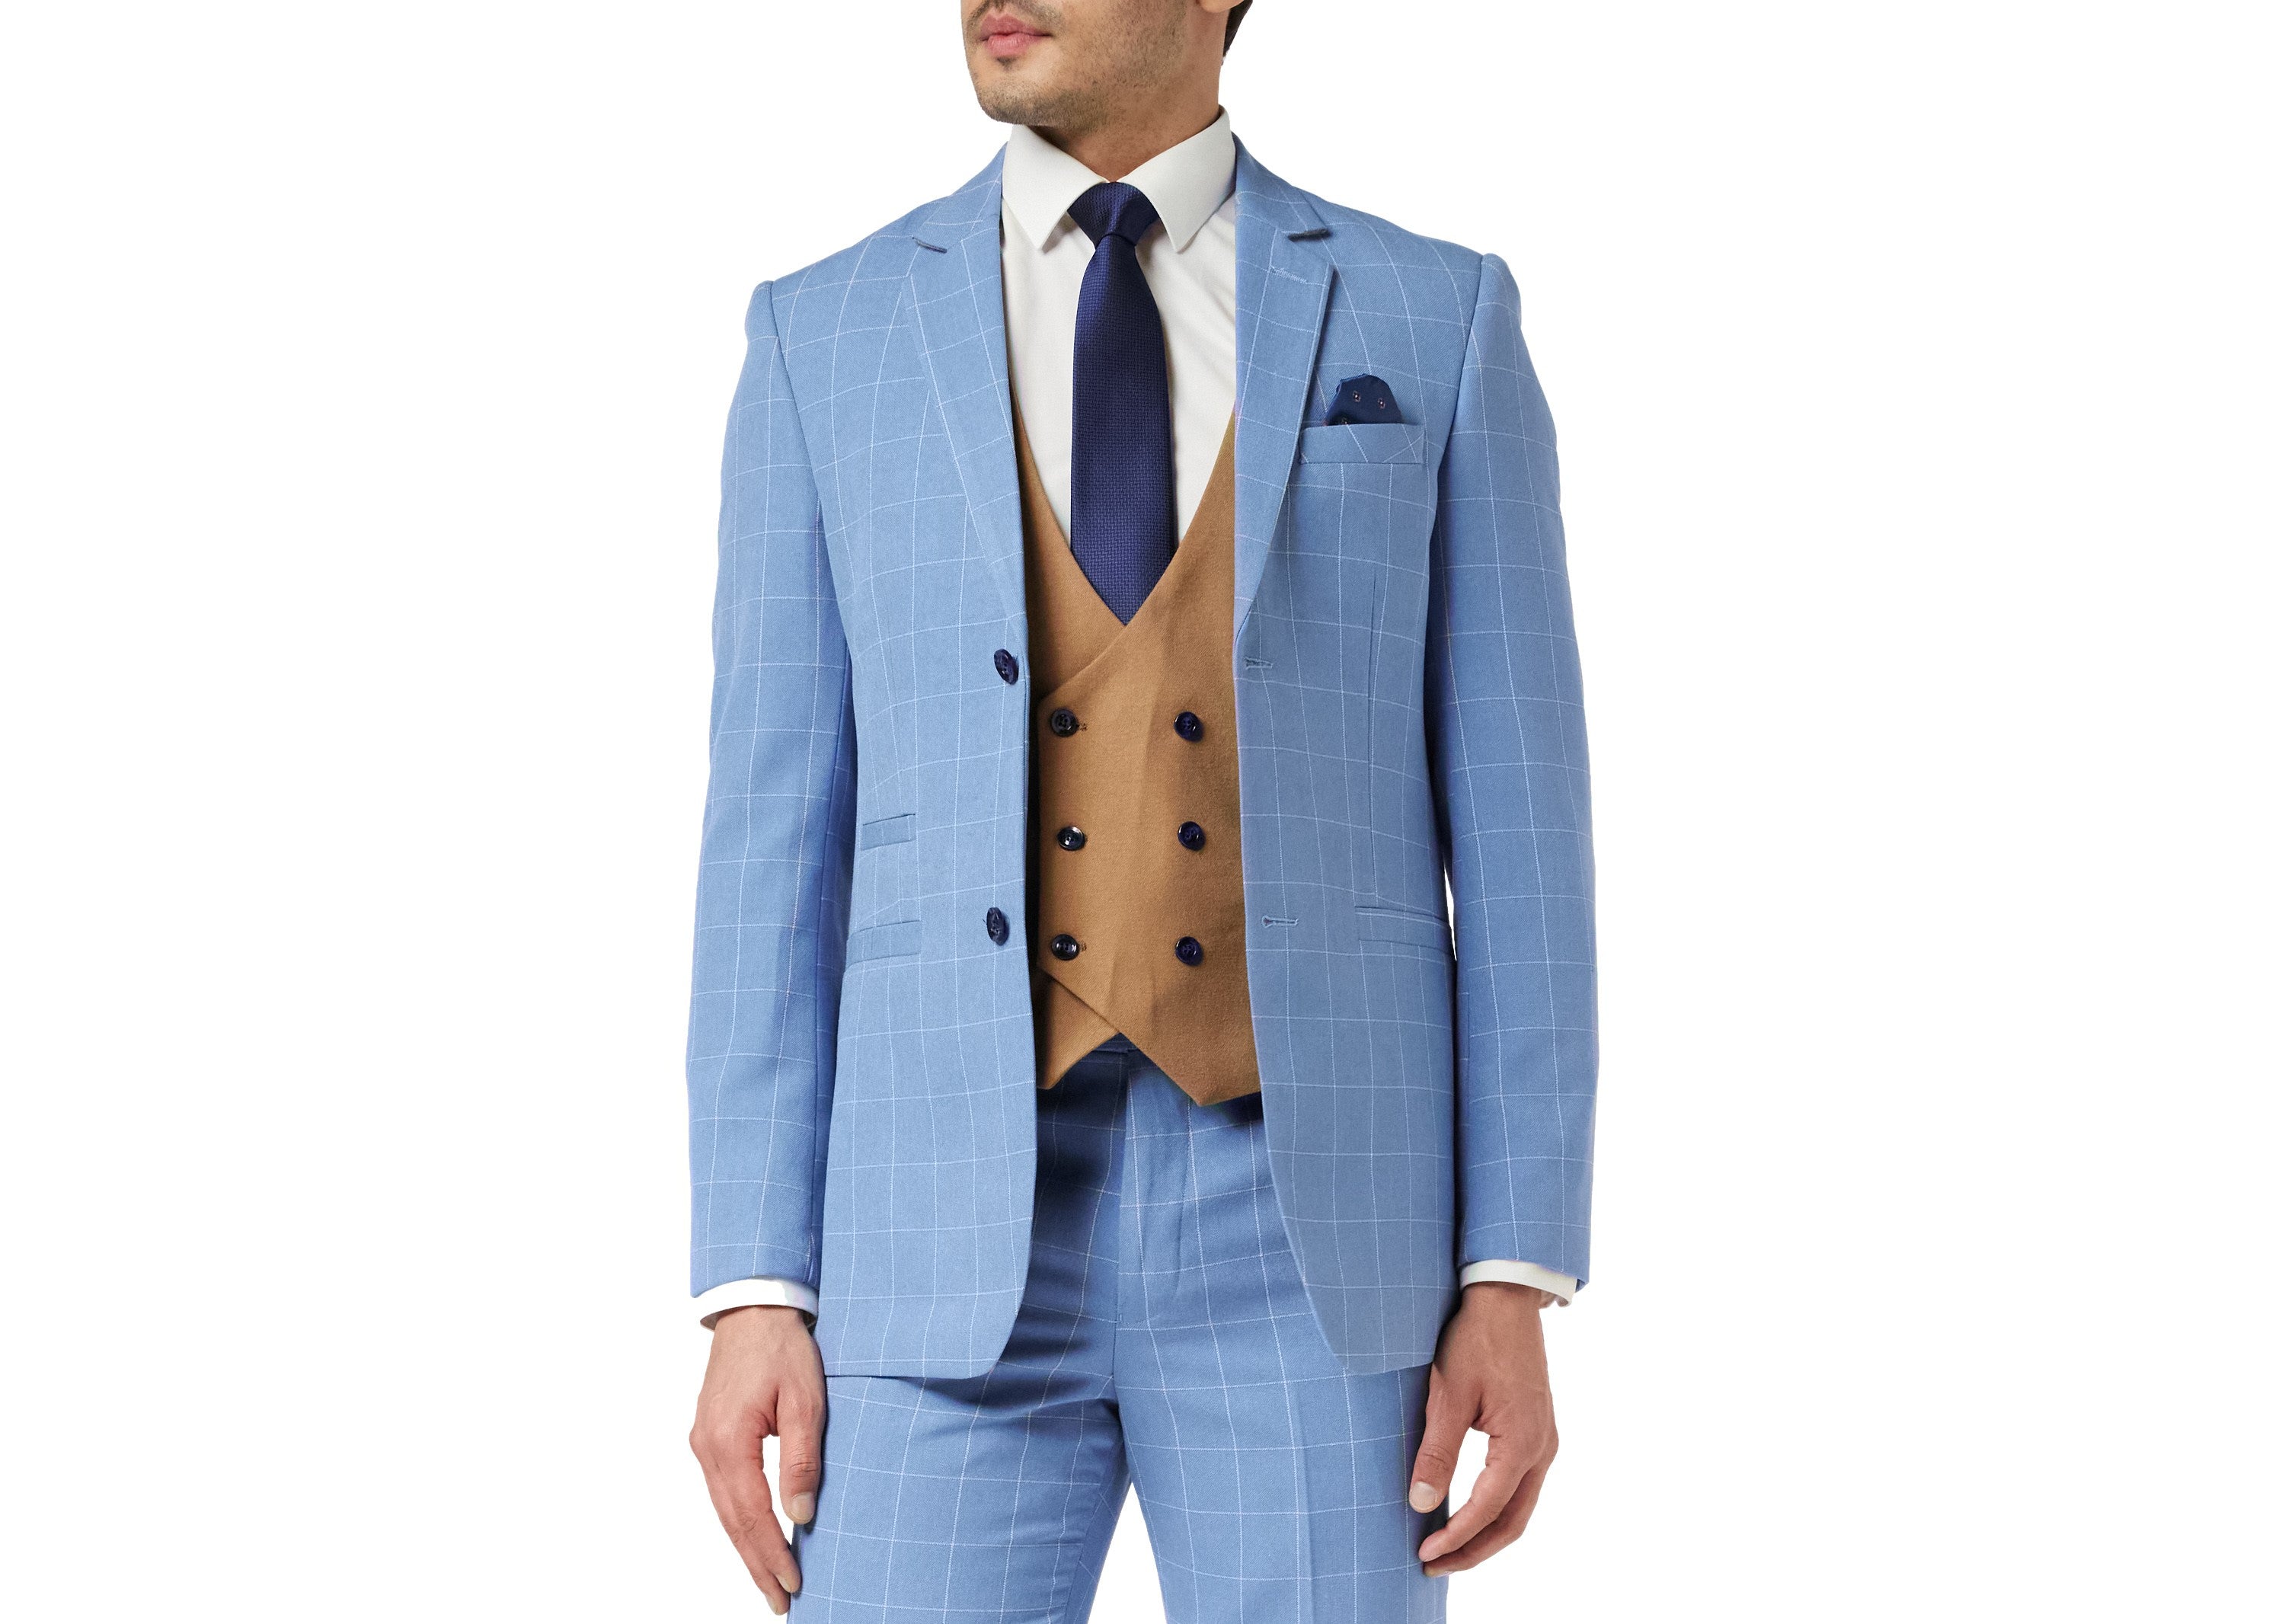 What to Wear with a Blue Suit